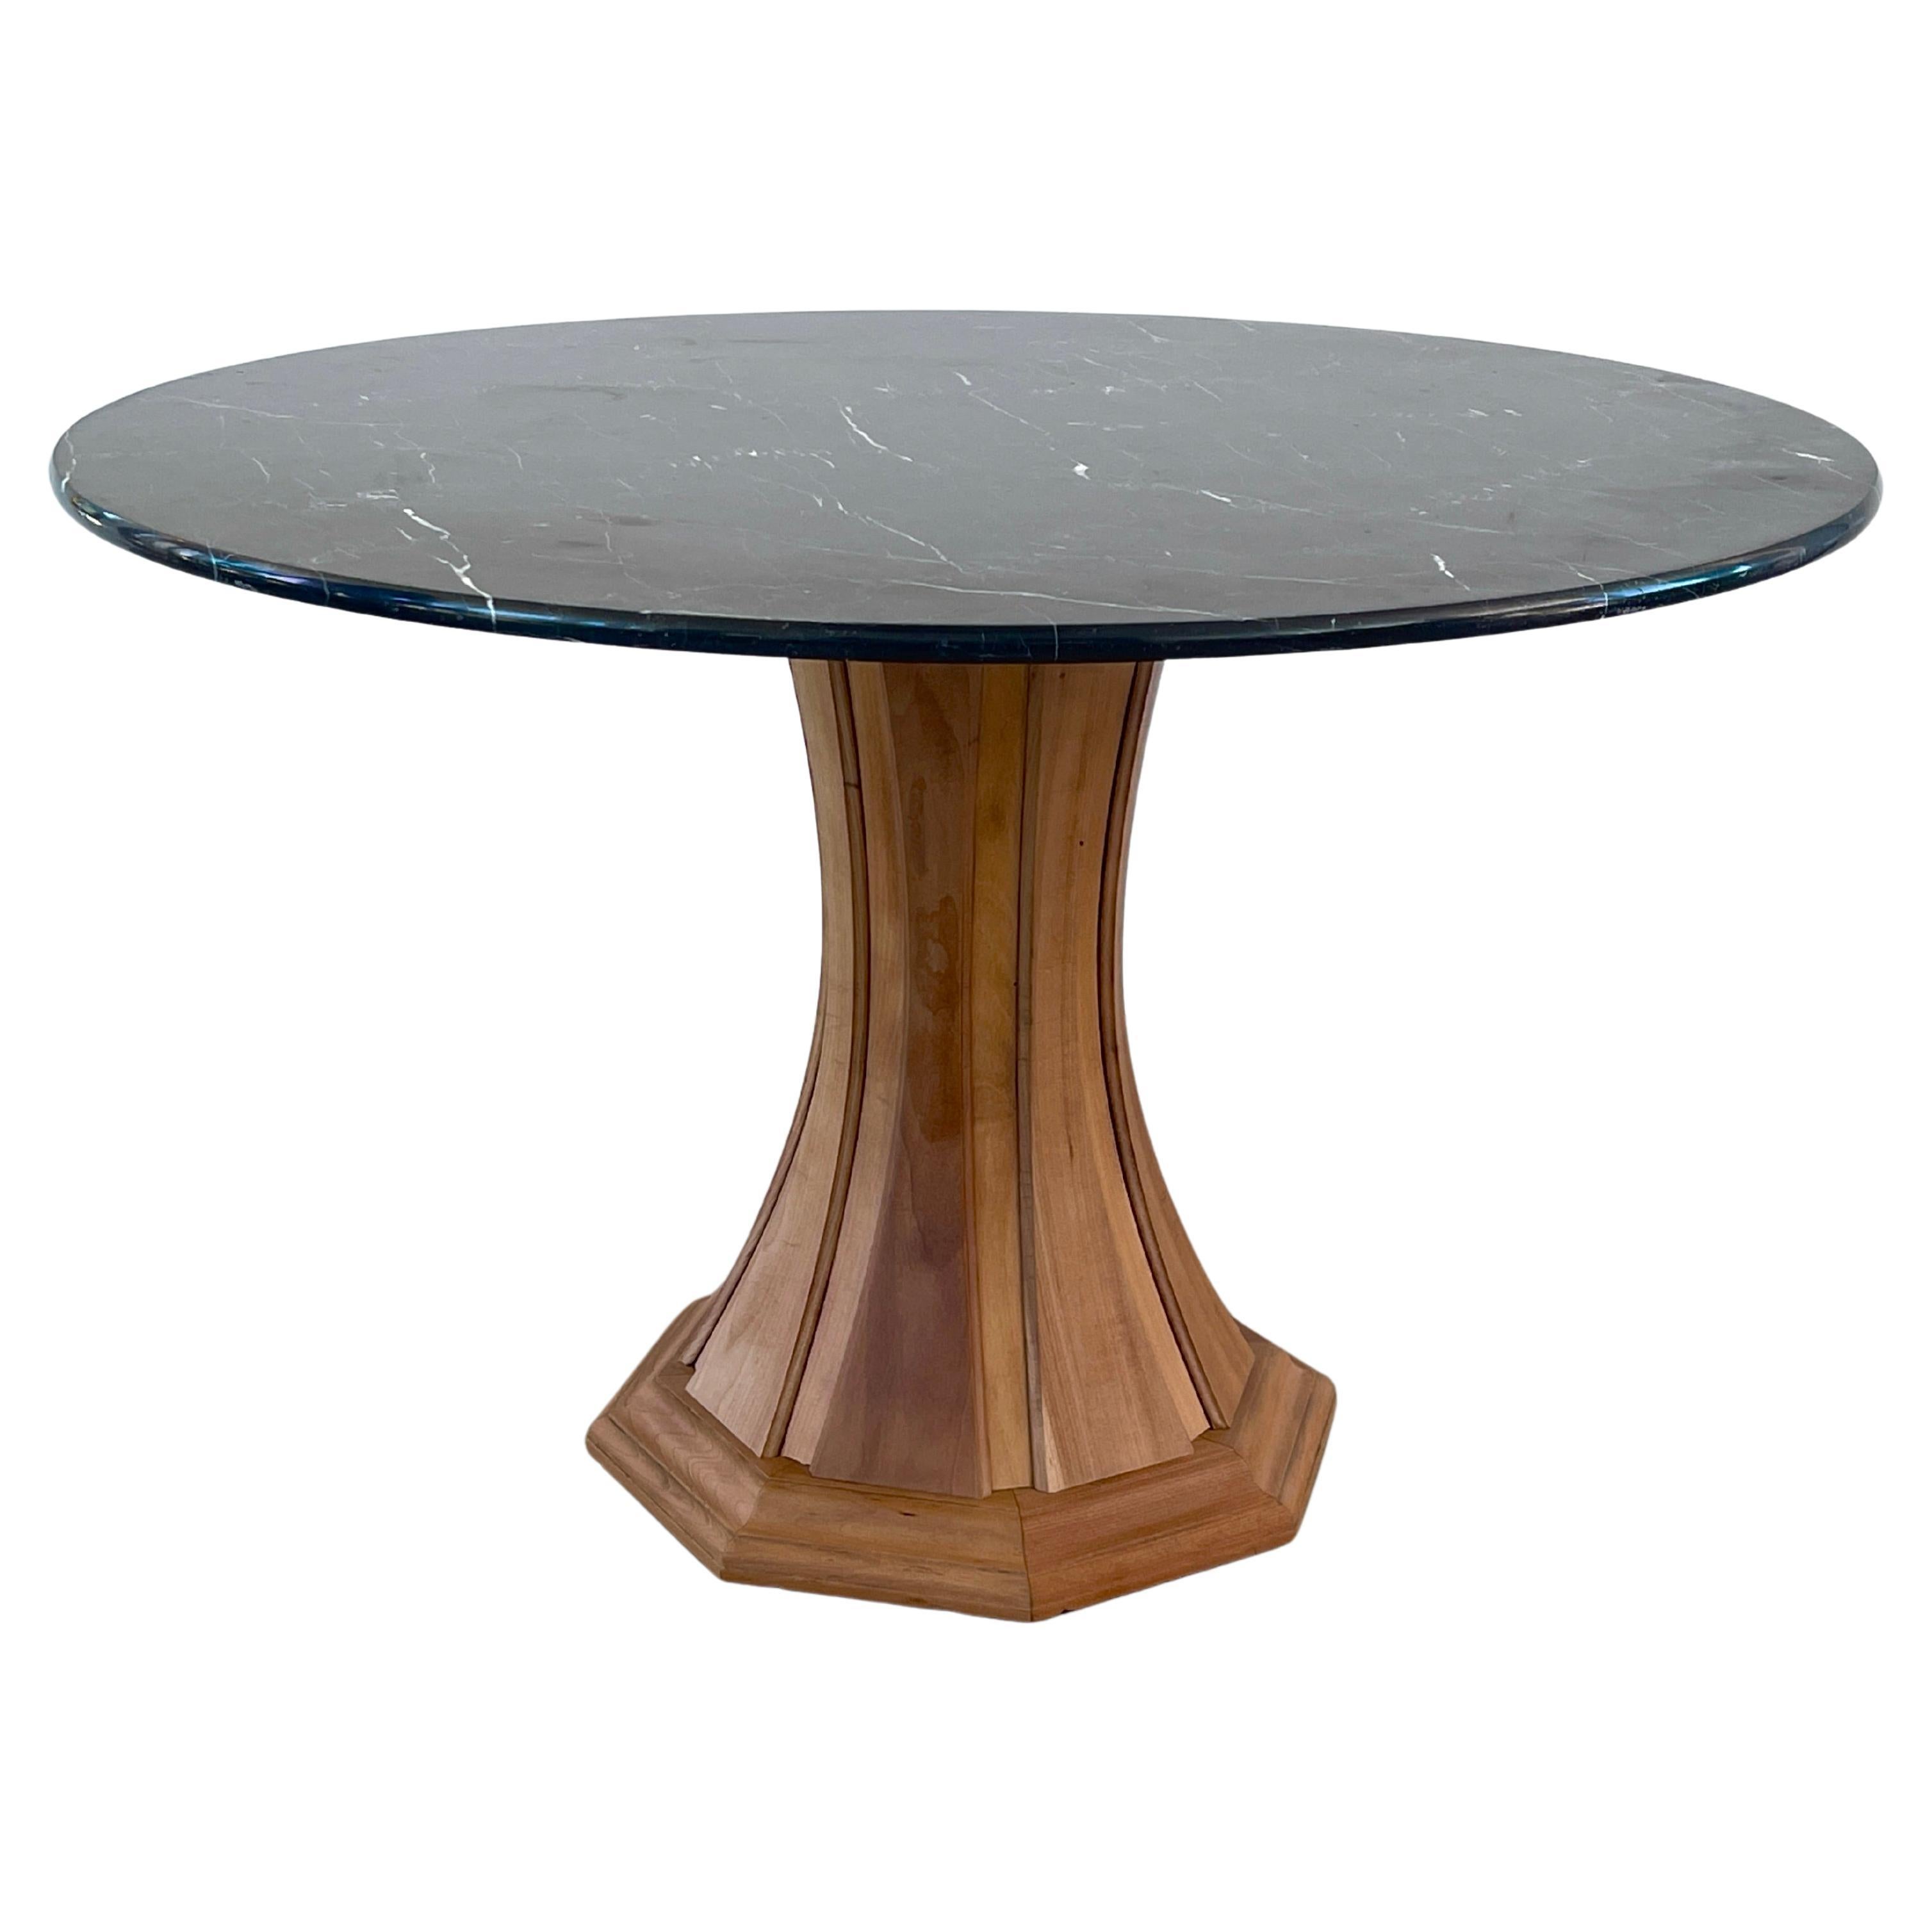 Italian Marble Center Table, 1950s For Sale